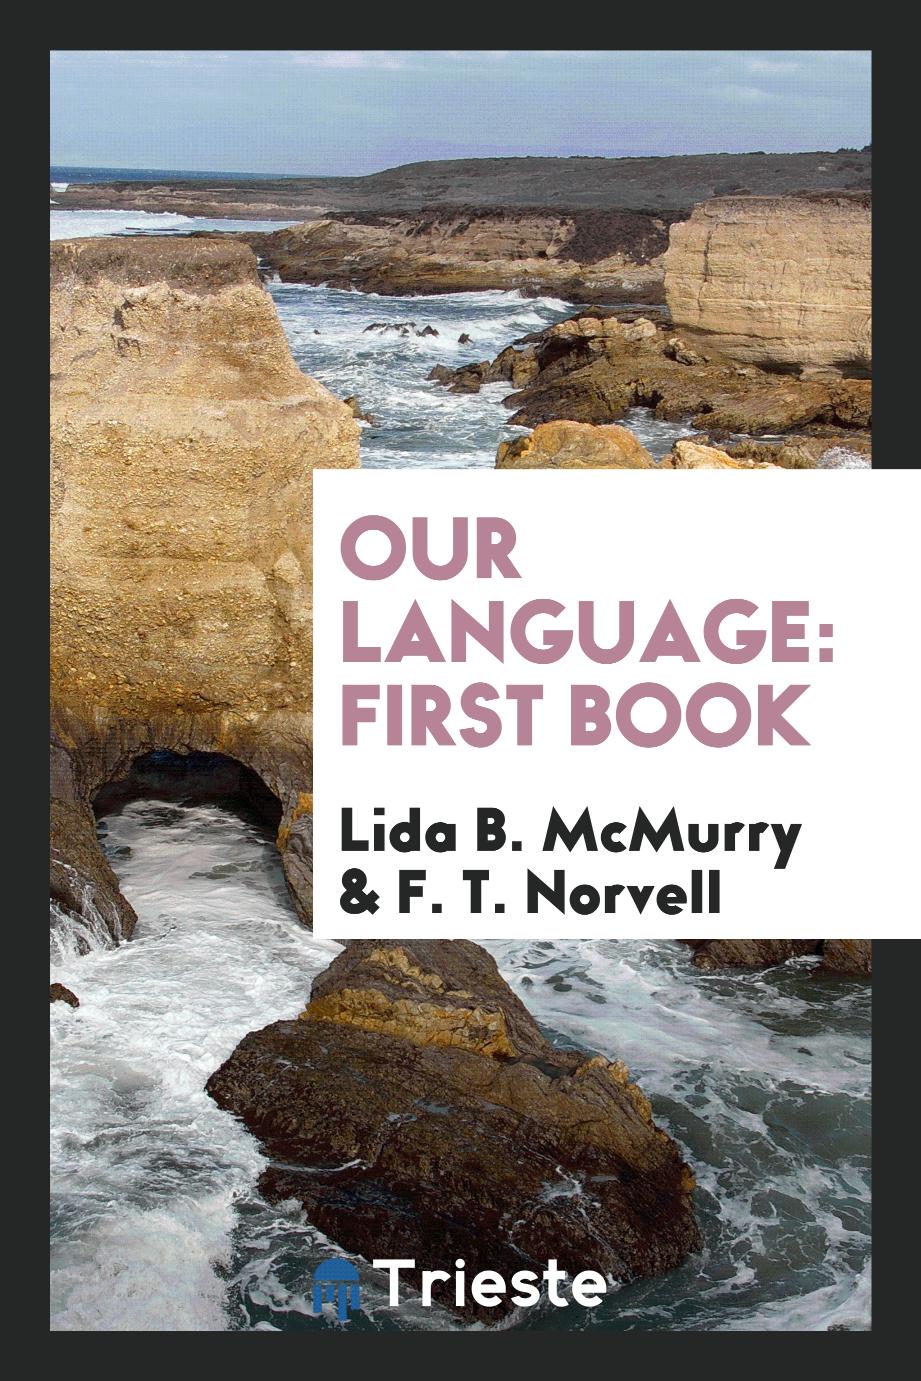 Our Language: First Book